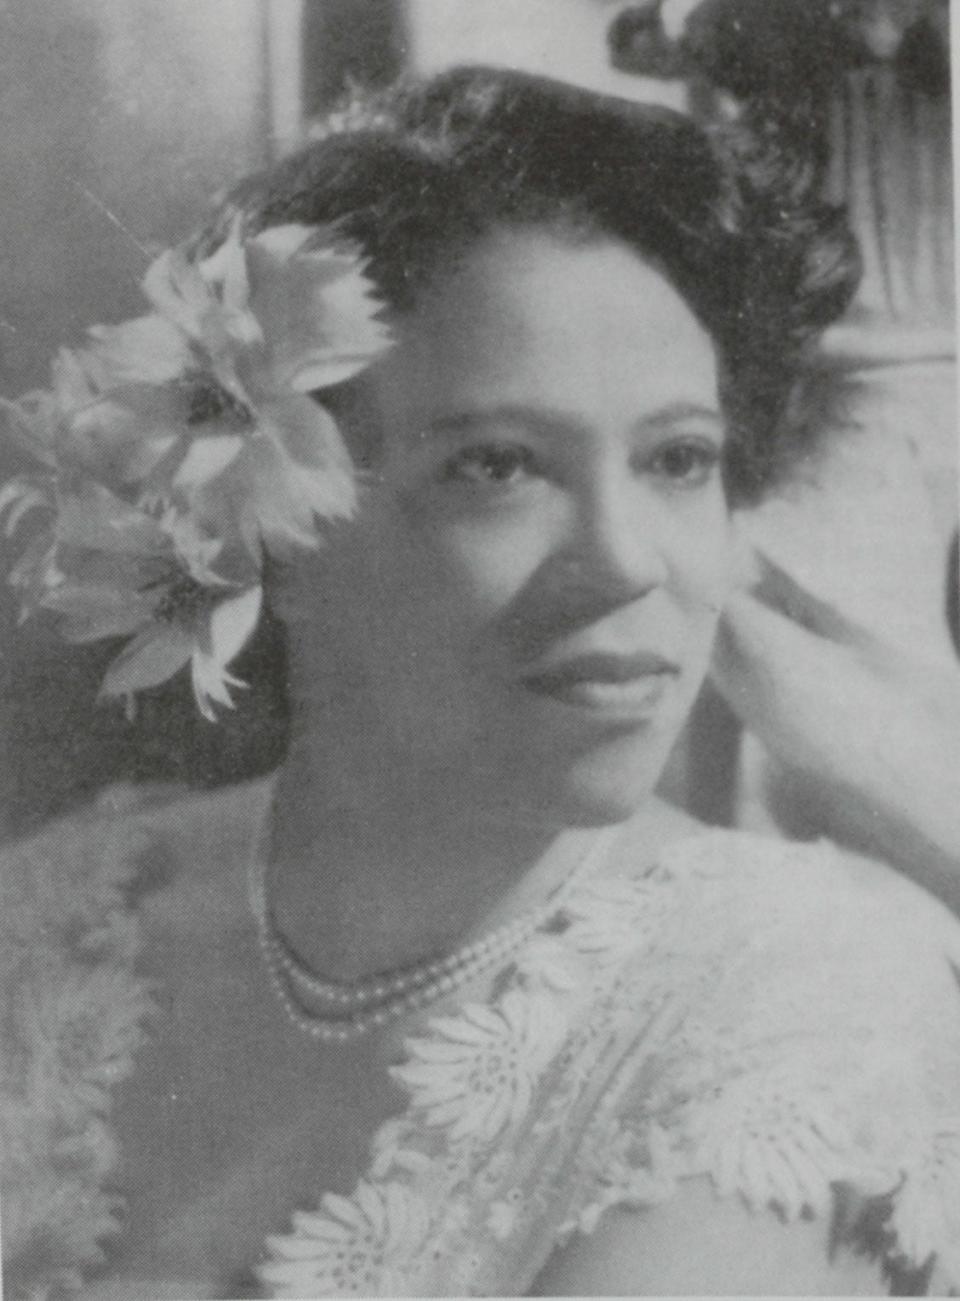 Ninety years ago, Caterina Jarboro became the first Black woman to perform at a major U.S. opera house.